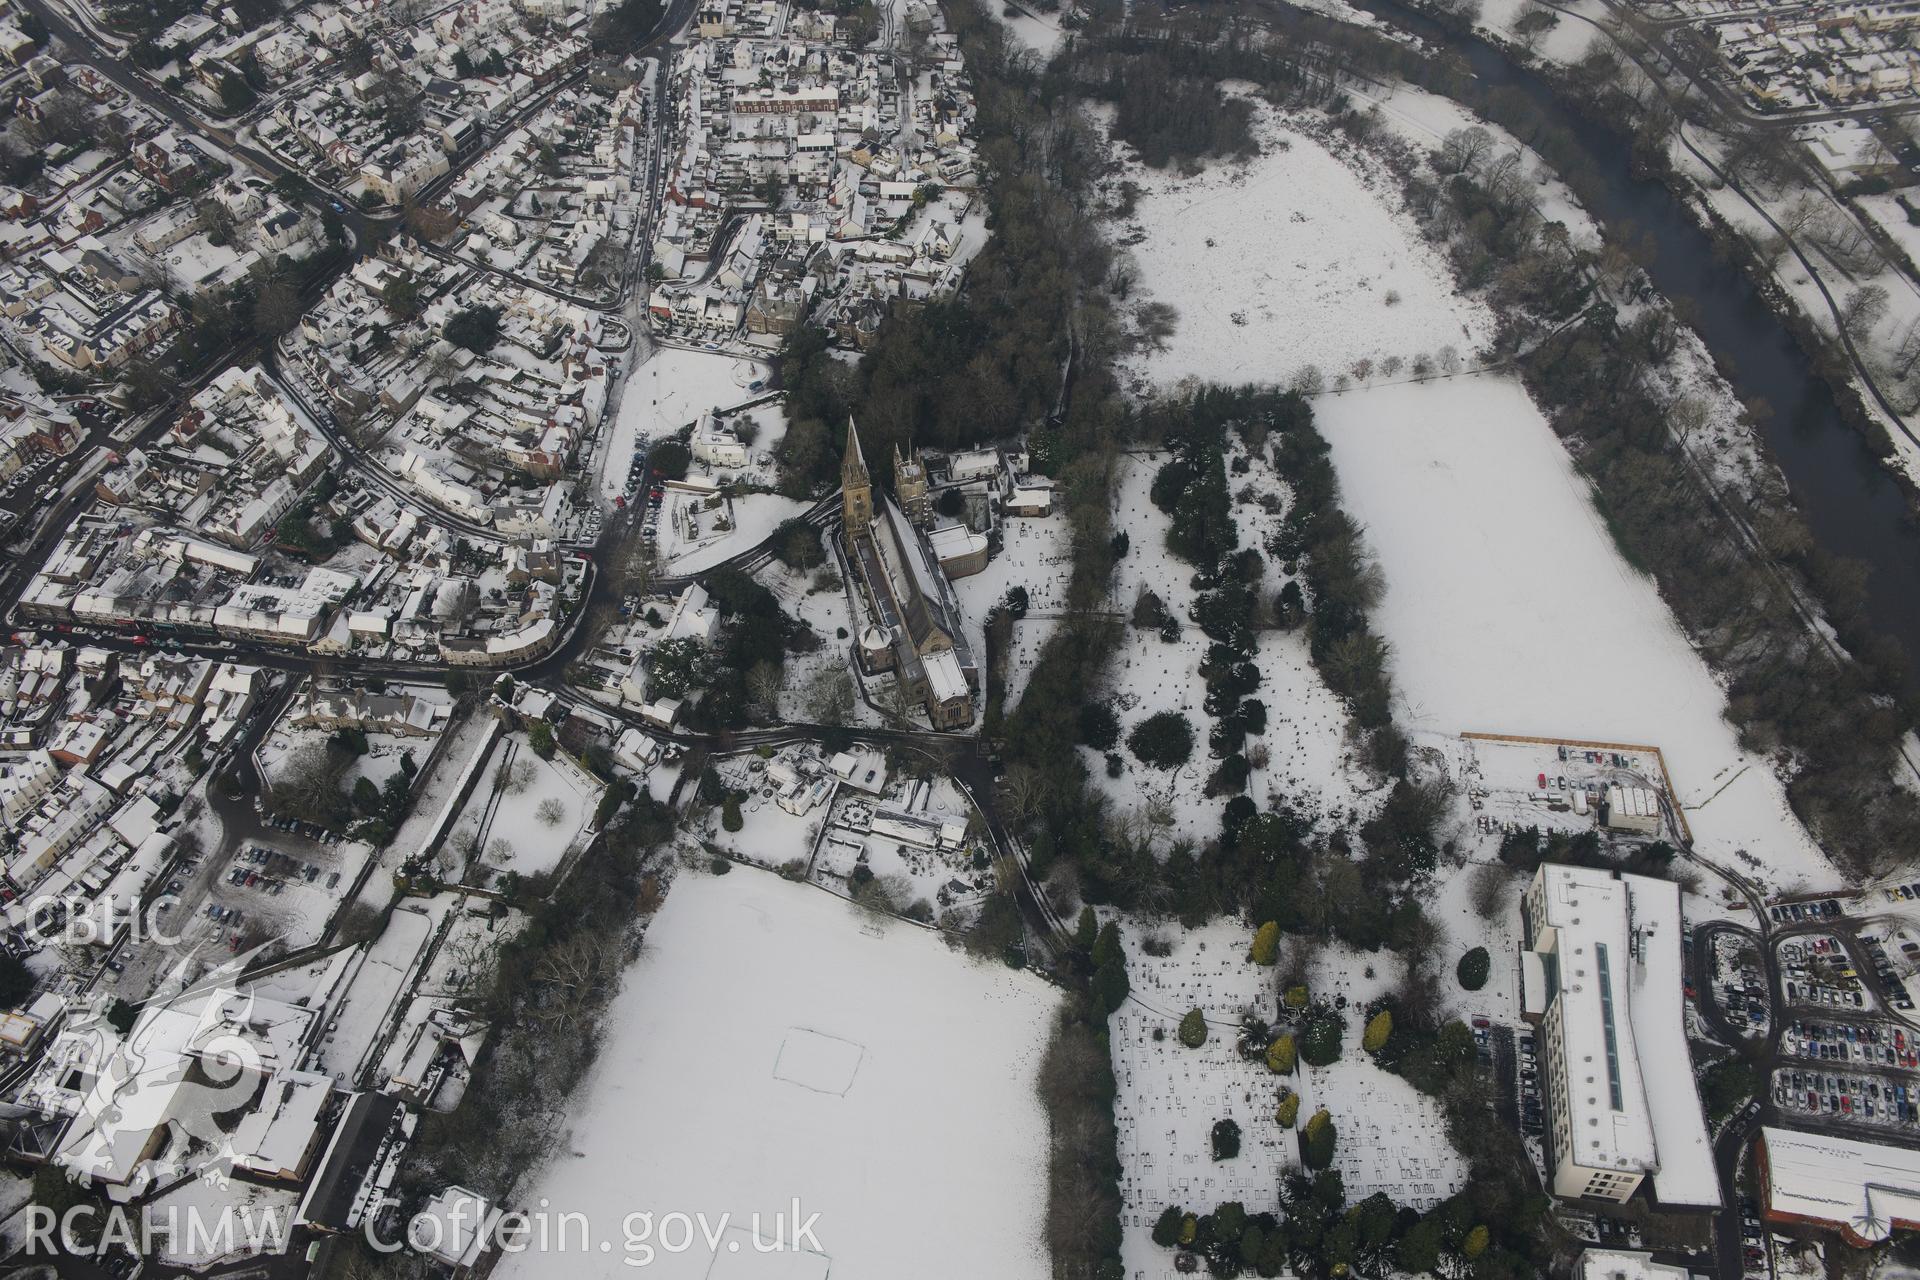 Llandaff Cathedral and Prebendal House, The Green, Llandaff, Cardiff. Oblique aerial photograph taken during the Royal Commission?s programme of archaeological aerial reconnaissance by Toby Driver on 24th January 2013.